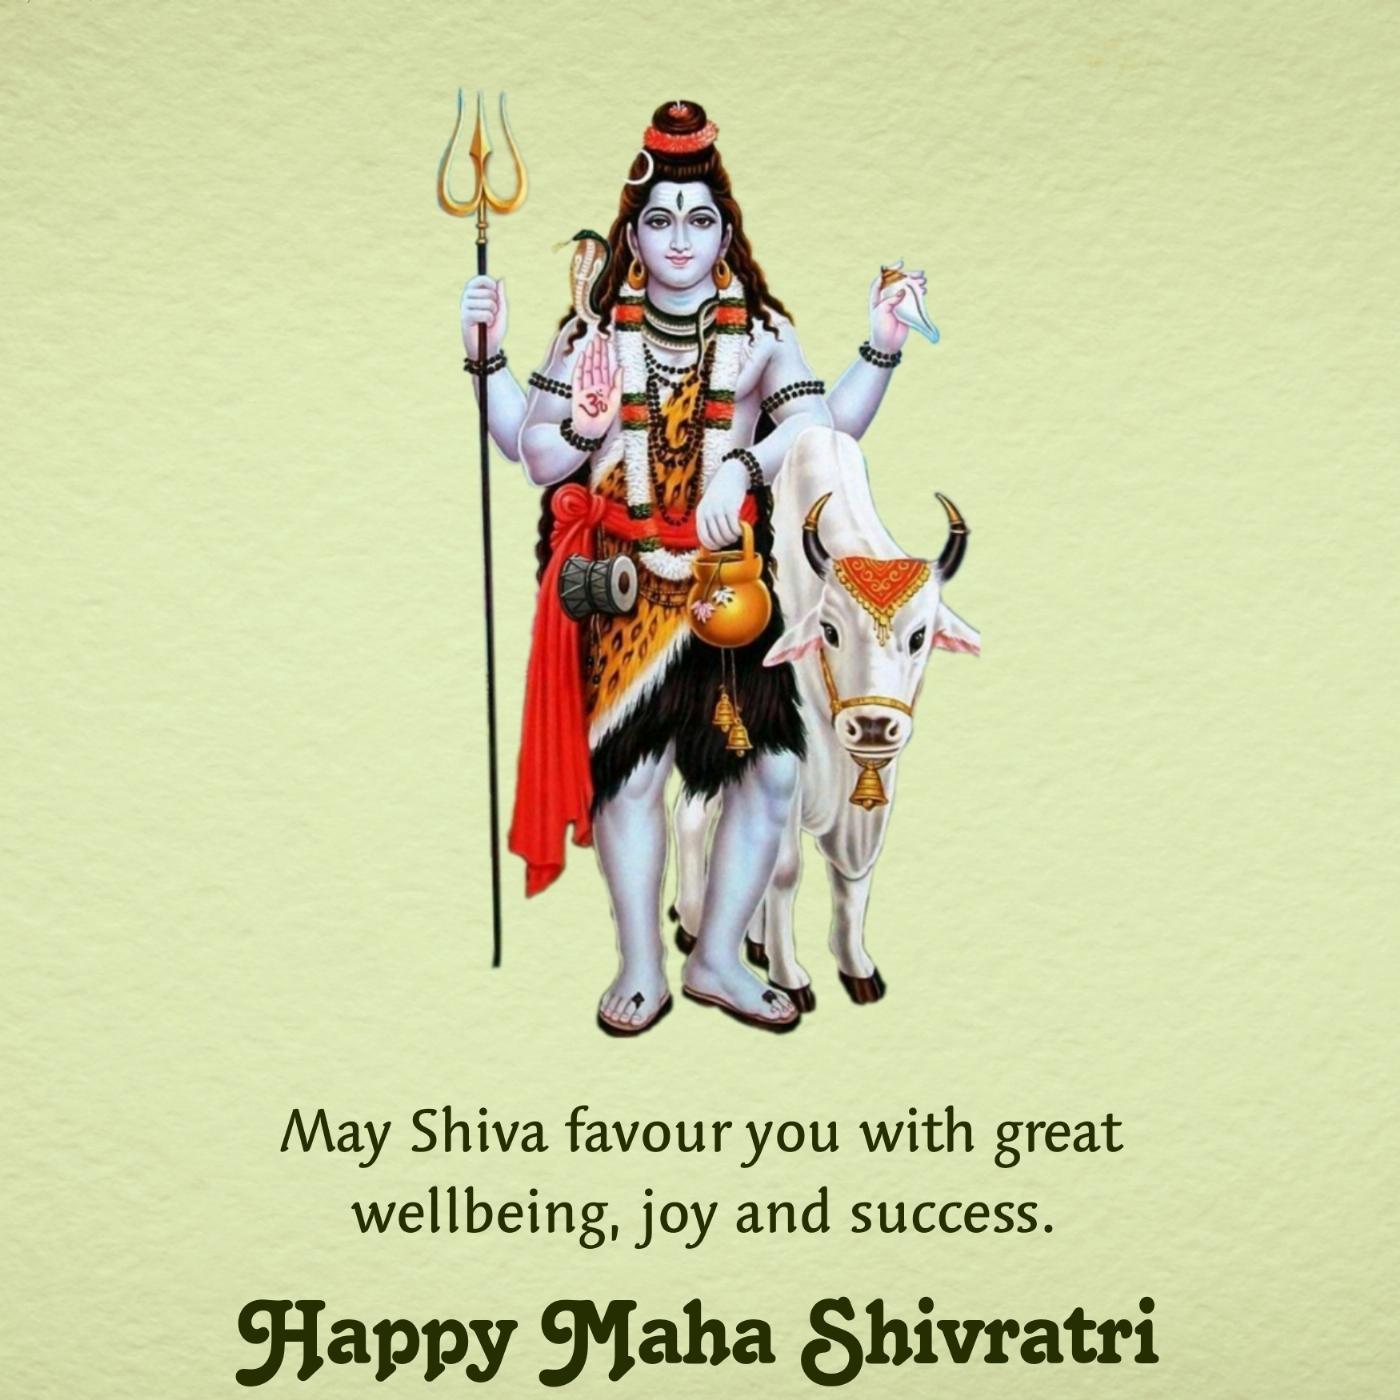 May Shiva favour you with great wellbeing joy and success